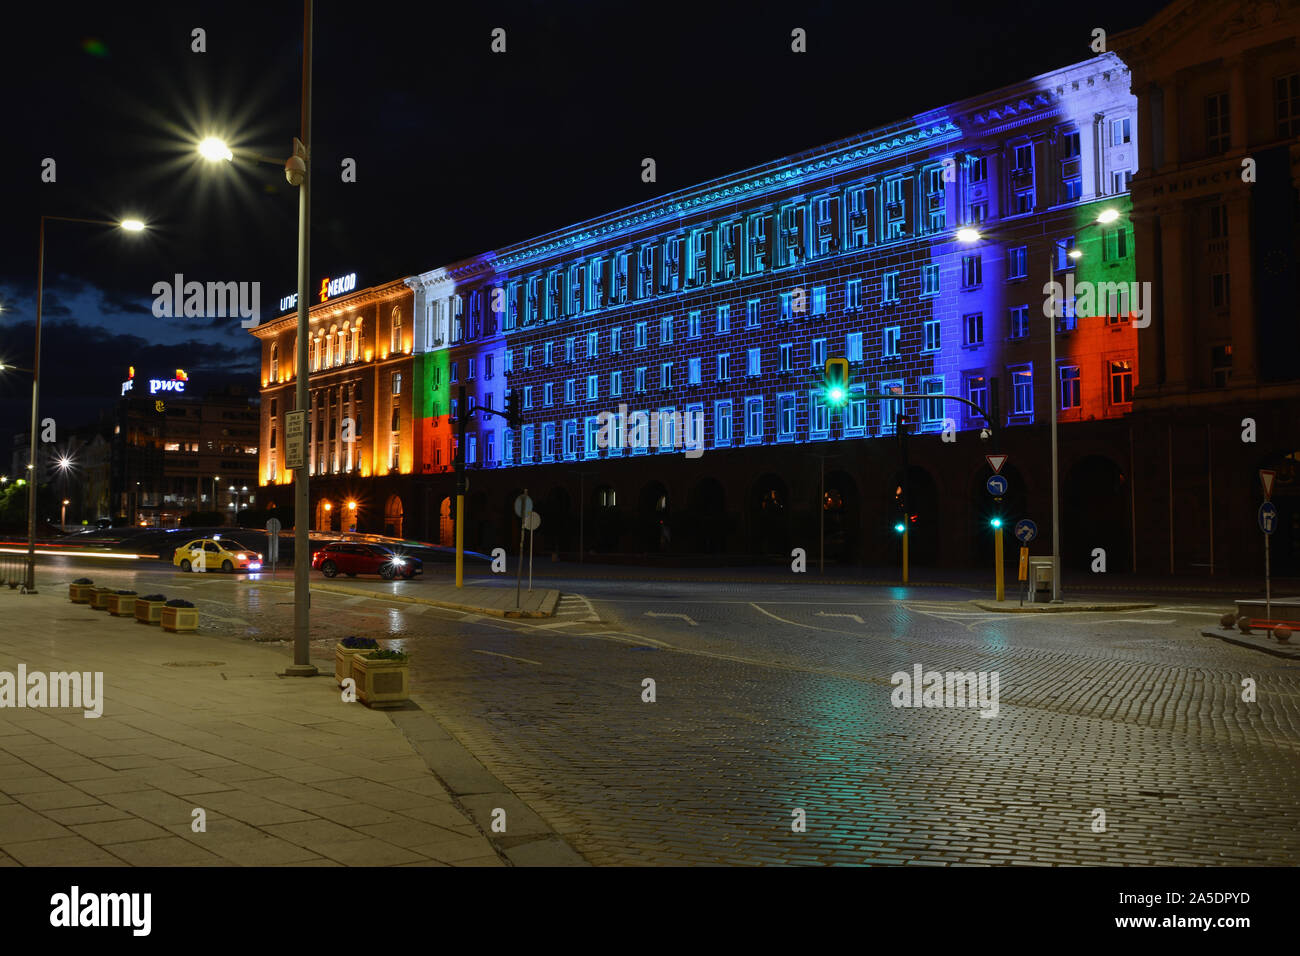 SOFIA, BULGARIA - MAY 8, 2018: Building of Council of Ministers in Sofia, Bulgaria. 3D Projection Mapping for the Day of Europe. Night view. Stock Photo